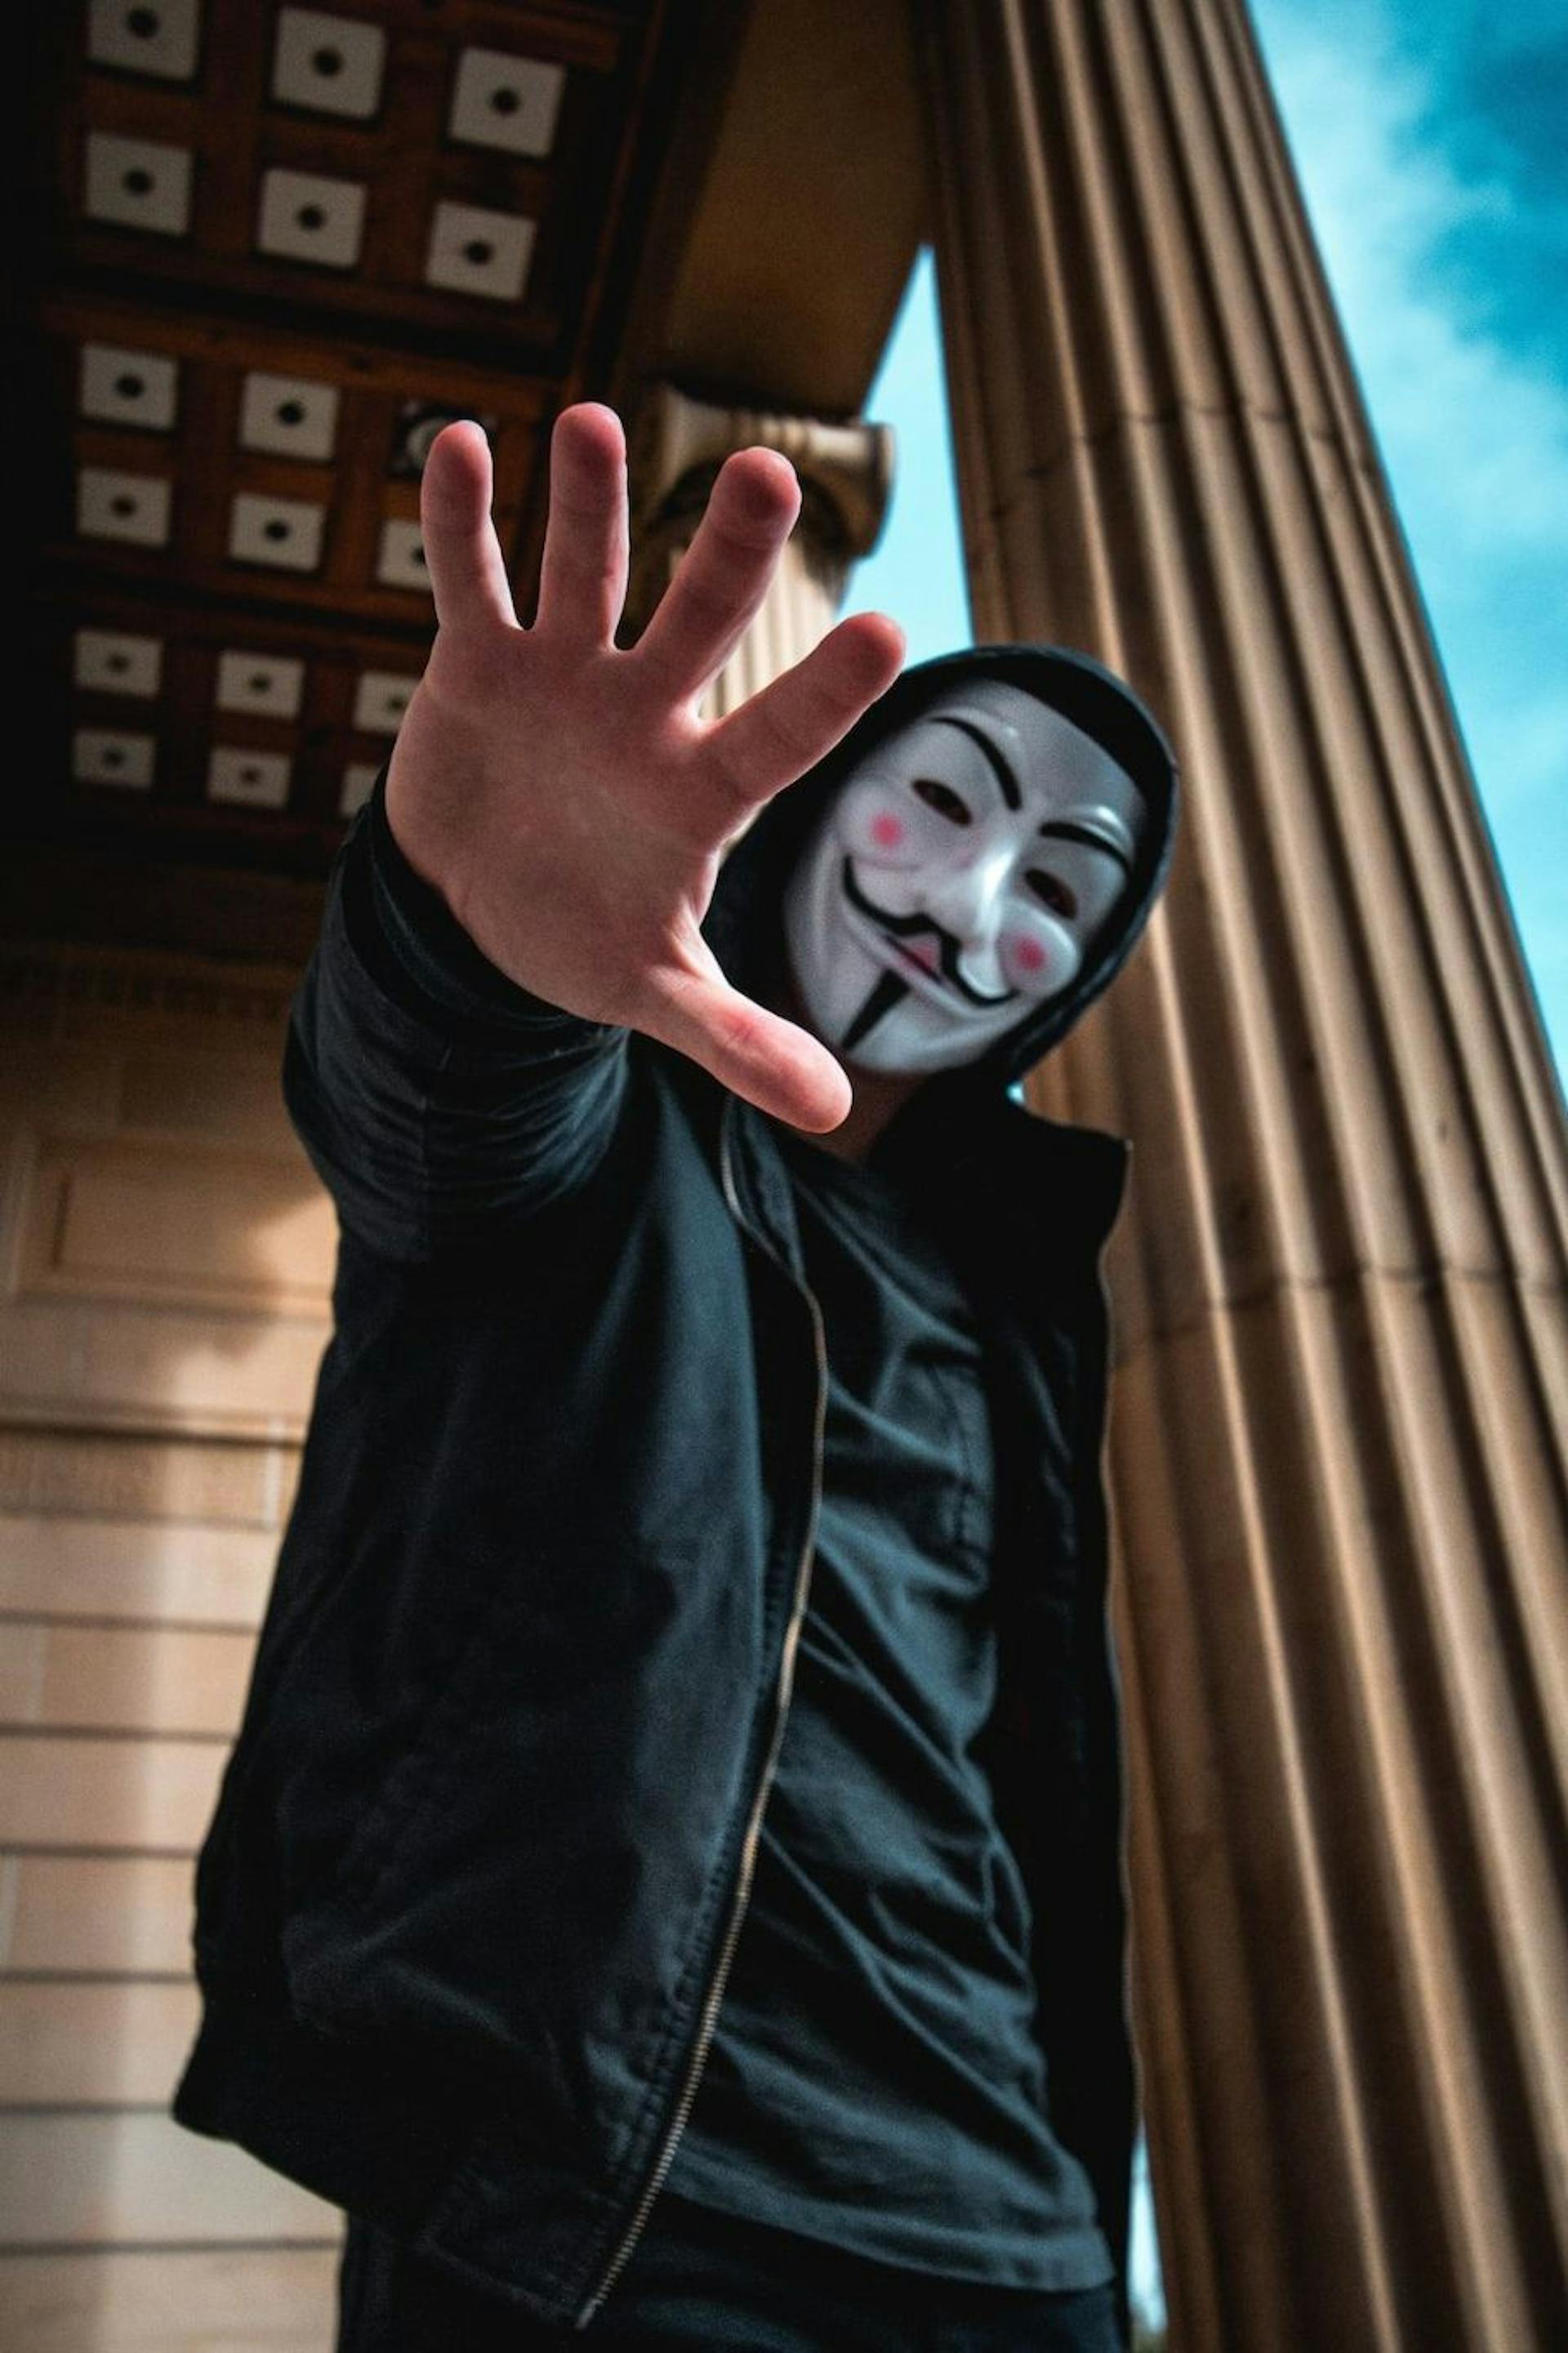 featured image - “Hackers for Hire” Is a Rising Industry That Demands Ethical Considerations